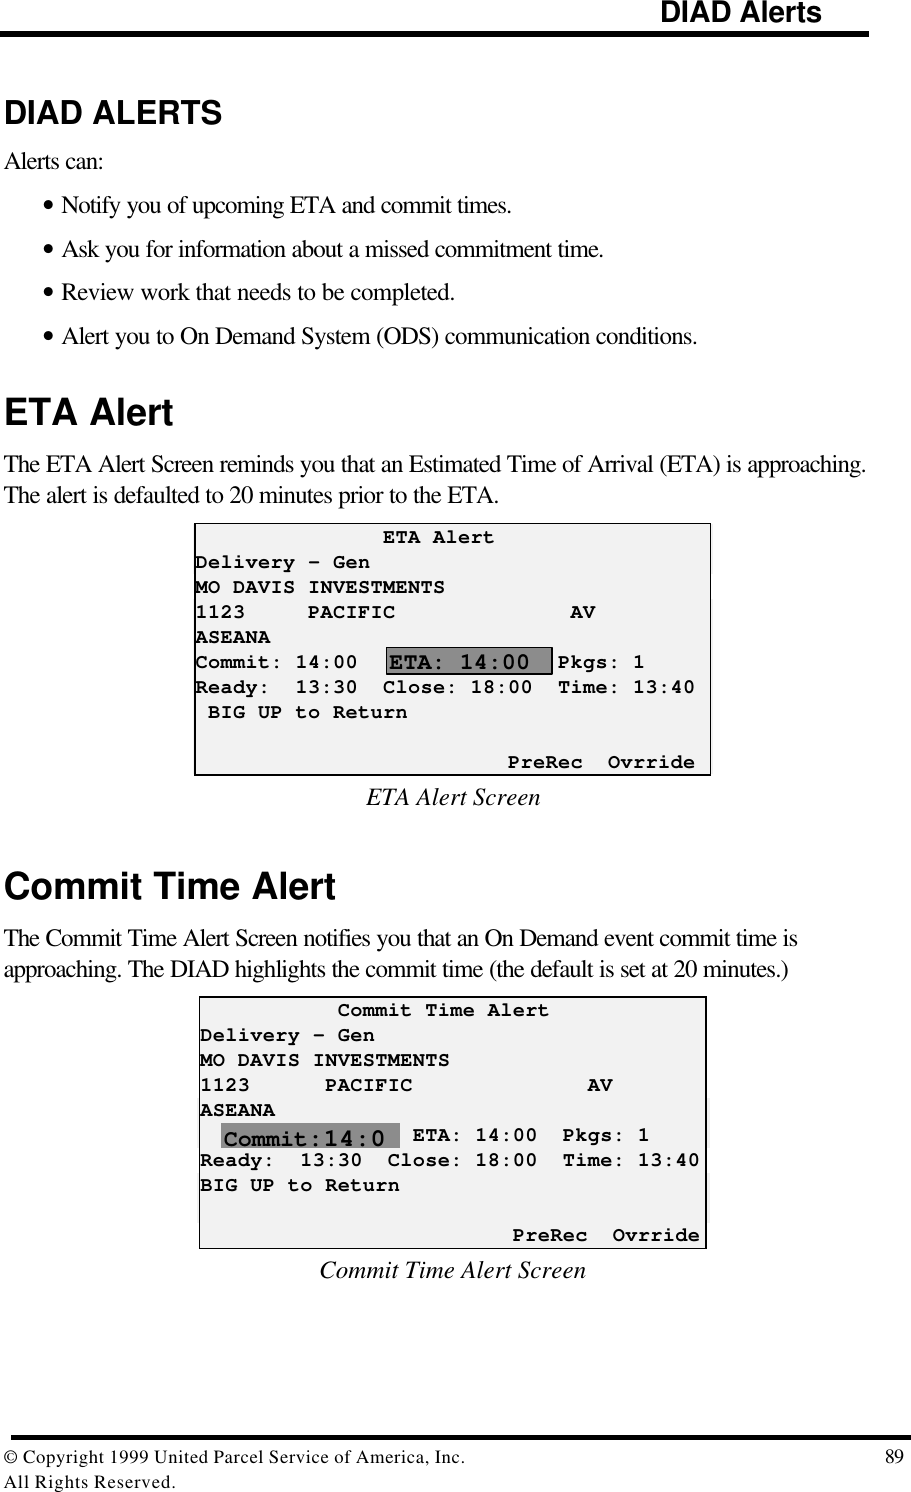                                                                                     DIAD Alerts© Copyright 1999 United Parcel Service of America, Inc.  89All Rights Reserved.DIAD ALERTSAlerts can:• Notify you of upcoming ETA and commit times.• Ask you for information about a missed commitment time.• Review work that needs to be completed.• Alert you to On Demand System (ODS) communication conditions.ETA AlertThe ETA Alert Screen reminds you that an Estimated Time of Arrival (ETA) is approaching.The alert is defaulted to 20 minutes prior to the ETA.               ETA AlertDelivery – GenMO DAVIS INVESTMENTS1123     PACIFIC              AVASEANACommit: 14:00                Pkgs: 1Ready:  13:30  Close: 18:00  Time: 13:40 BIG UP to Return                         PreRec  OvrrideETA Alert ScreenCommit Time AlertThe Commit Time Alert Screen notifies you that an On Demand event commit time isapproaching. The DIAD highlights the commit time (the default is set at 20 minutes.)           Commit Time AlertDelivery – GenMO DAVIS INVESTMENTS1123      PACIFIC              AVASEANA                 ETA: 14:00  Pkgs: 1Ready:  13:30  Close: 18:00  Time: 13:40BIG UP to Return                         PreRec  OvrrideCommit Time Alert ScreenCommit:14:0ETA: 14:00